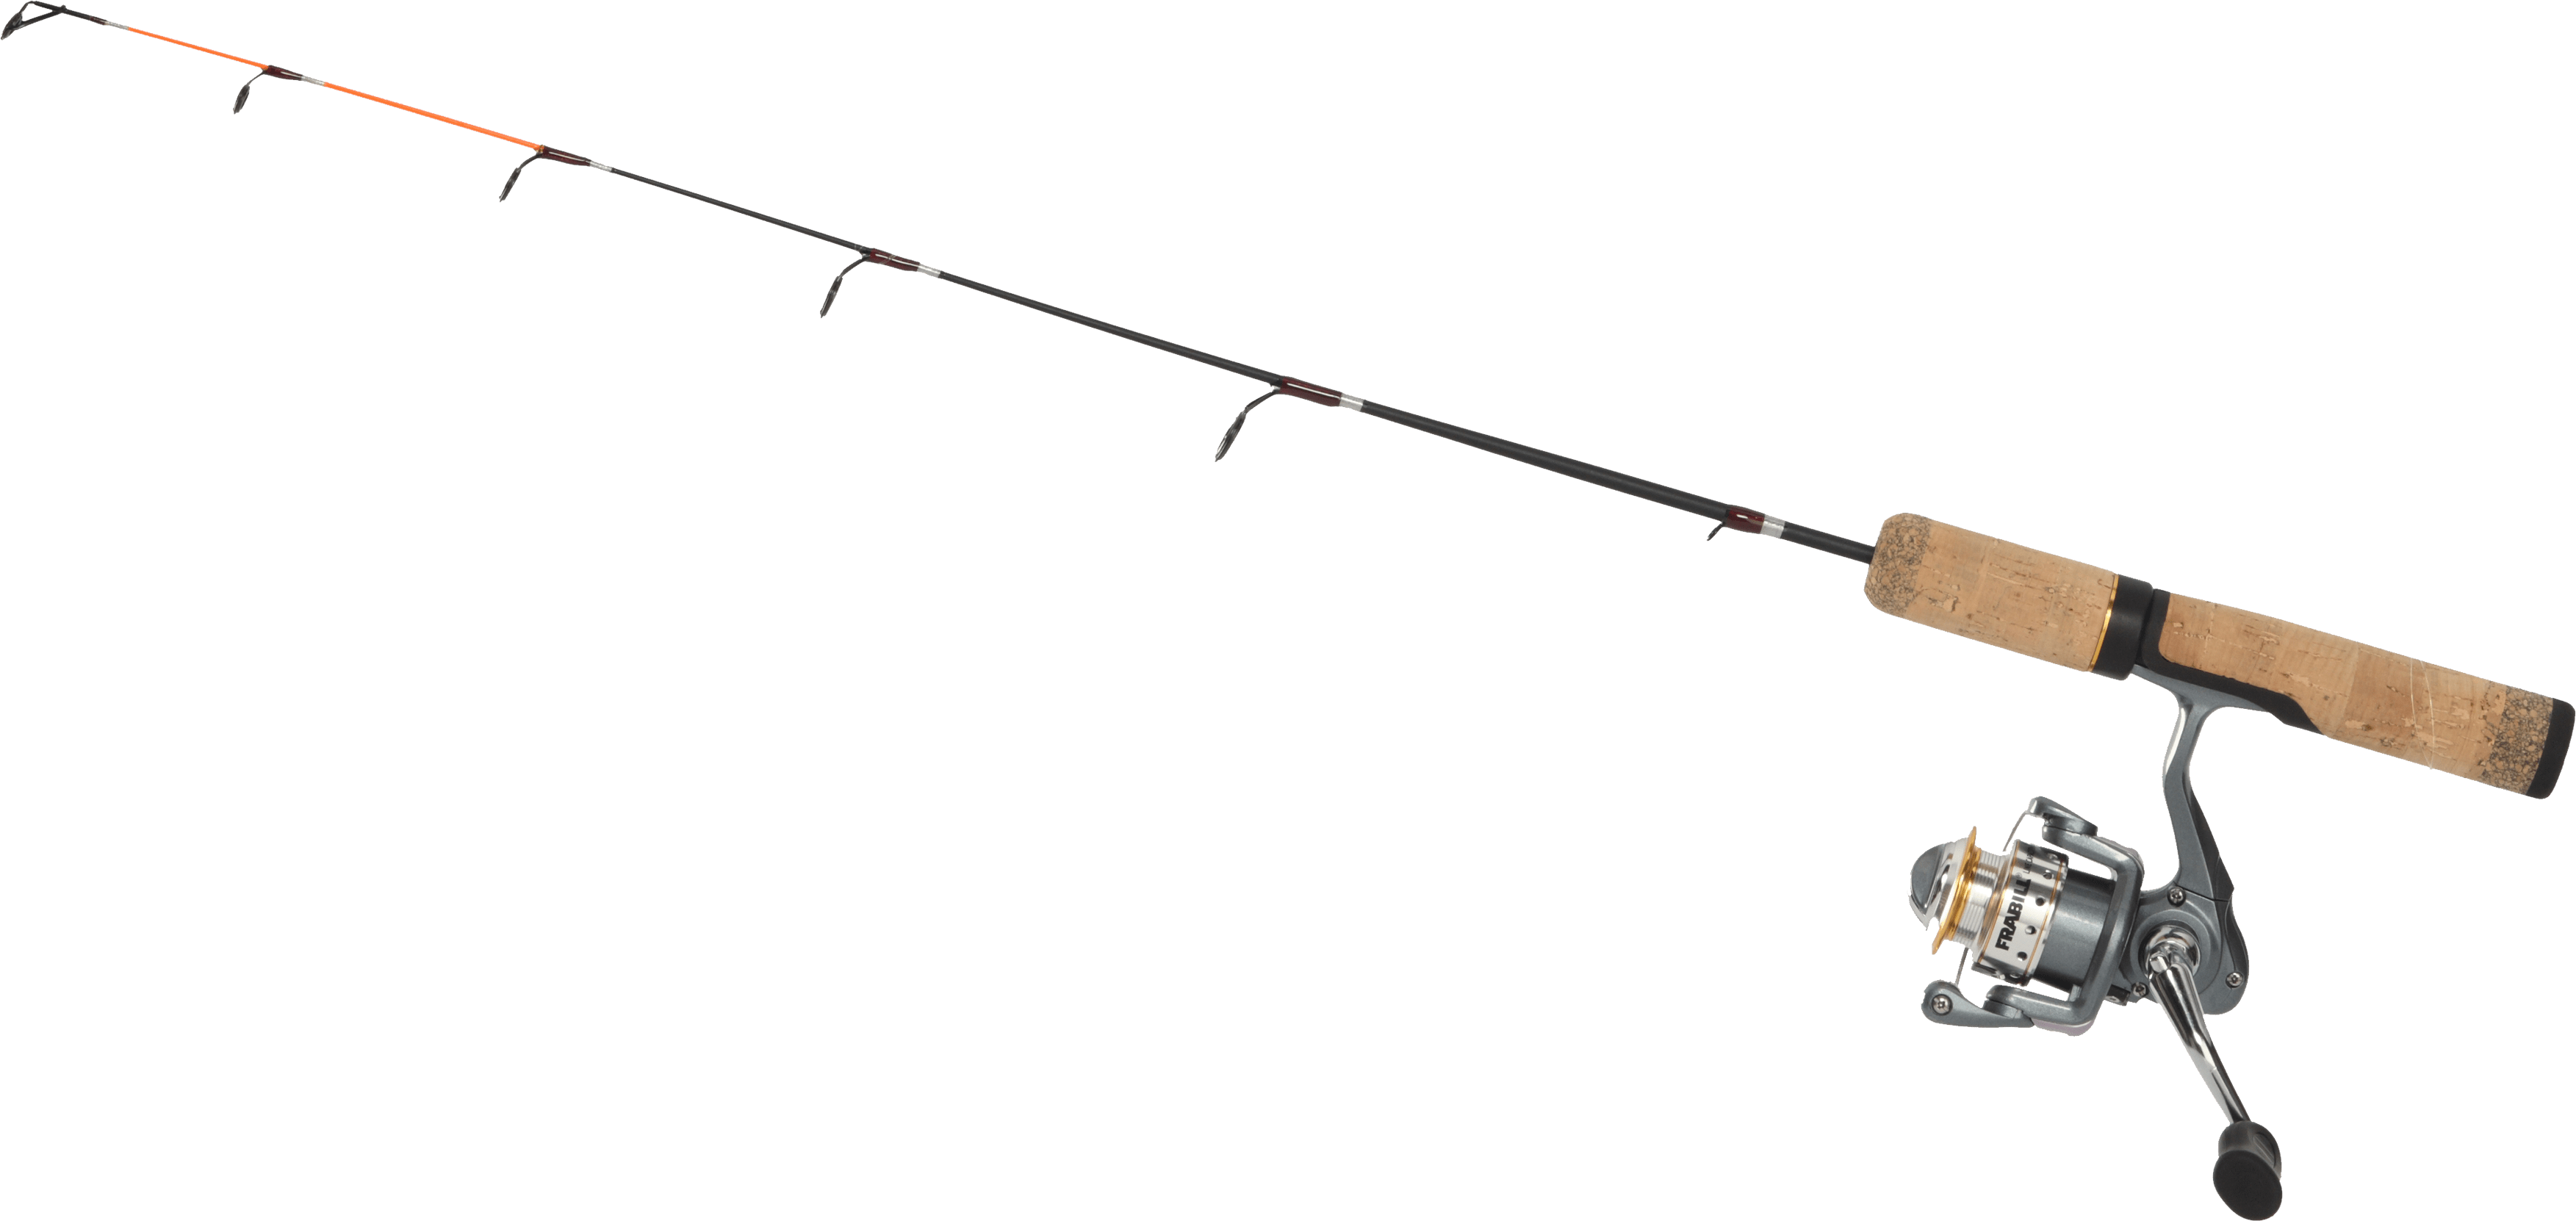 Download Pole Fishing Bamboo Free Clipart HD HQ PNG Image